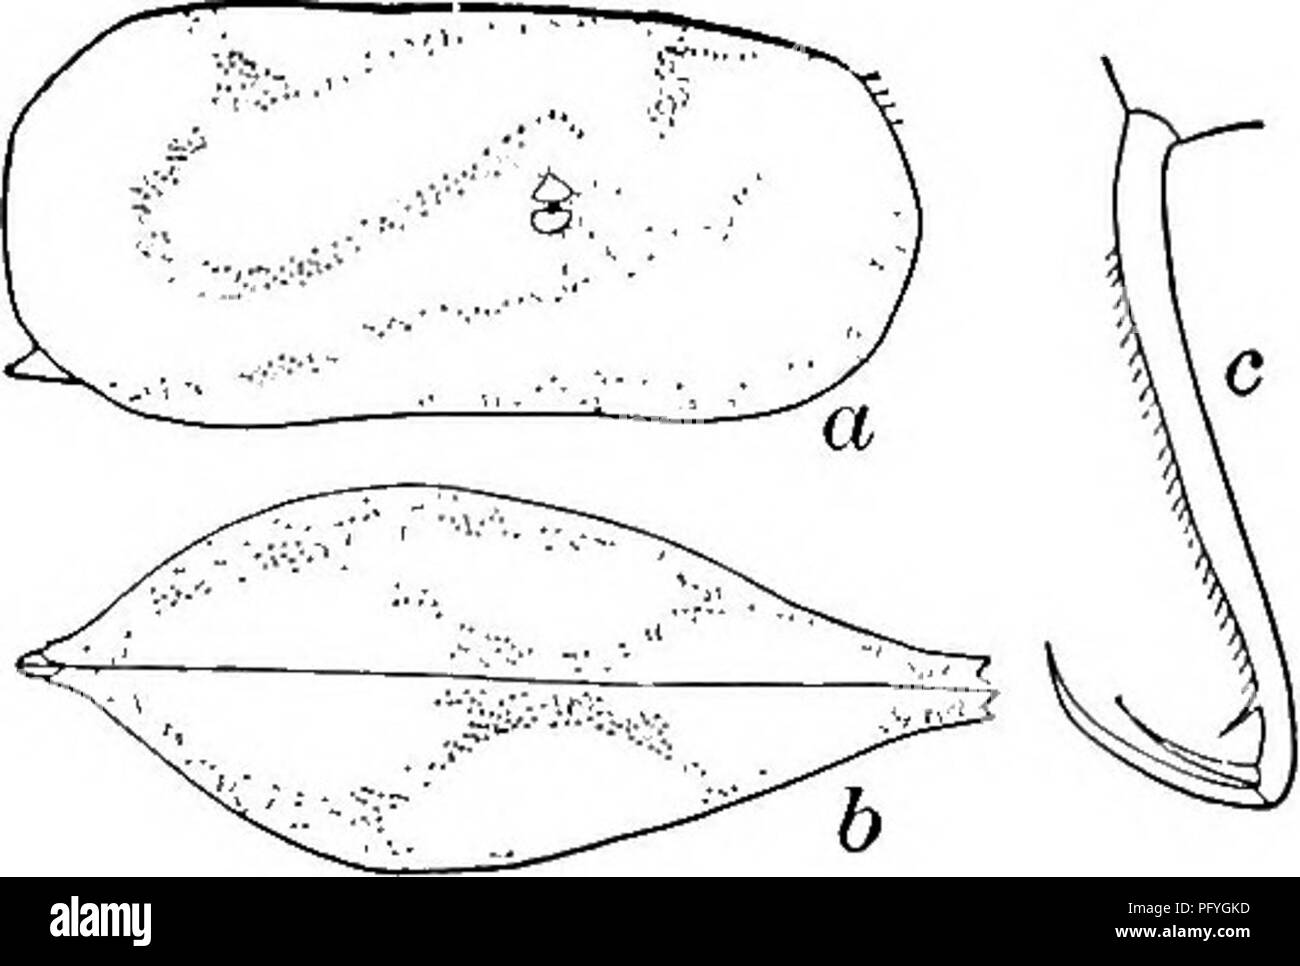 . Fresh-water biology. Freshwater biology. THE OSTRACODA 819 73 (74) Posterior margin of furca pectinate (Fig. 1280 c). Cypris (Paracypris) perelegans Herrick 1887. Length 3.60 mm., height 1.72 mm., width 1.40 mm. Color clear pale yellow, with a sigmoid pattern in clear brown. Seen from above, the shell is acutely wedge-shaped anteriorly. From the side the upper and lower margins are nearly parallel, with a large projecting tooth postero- ventrally. Terminal segment of second leg with two small claws and one seta. Dorsal seta spine-Uke. Weedy ponds. Alabama. Fig. 1280. Cypris (Paracypris) pere Stock Photo